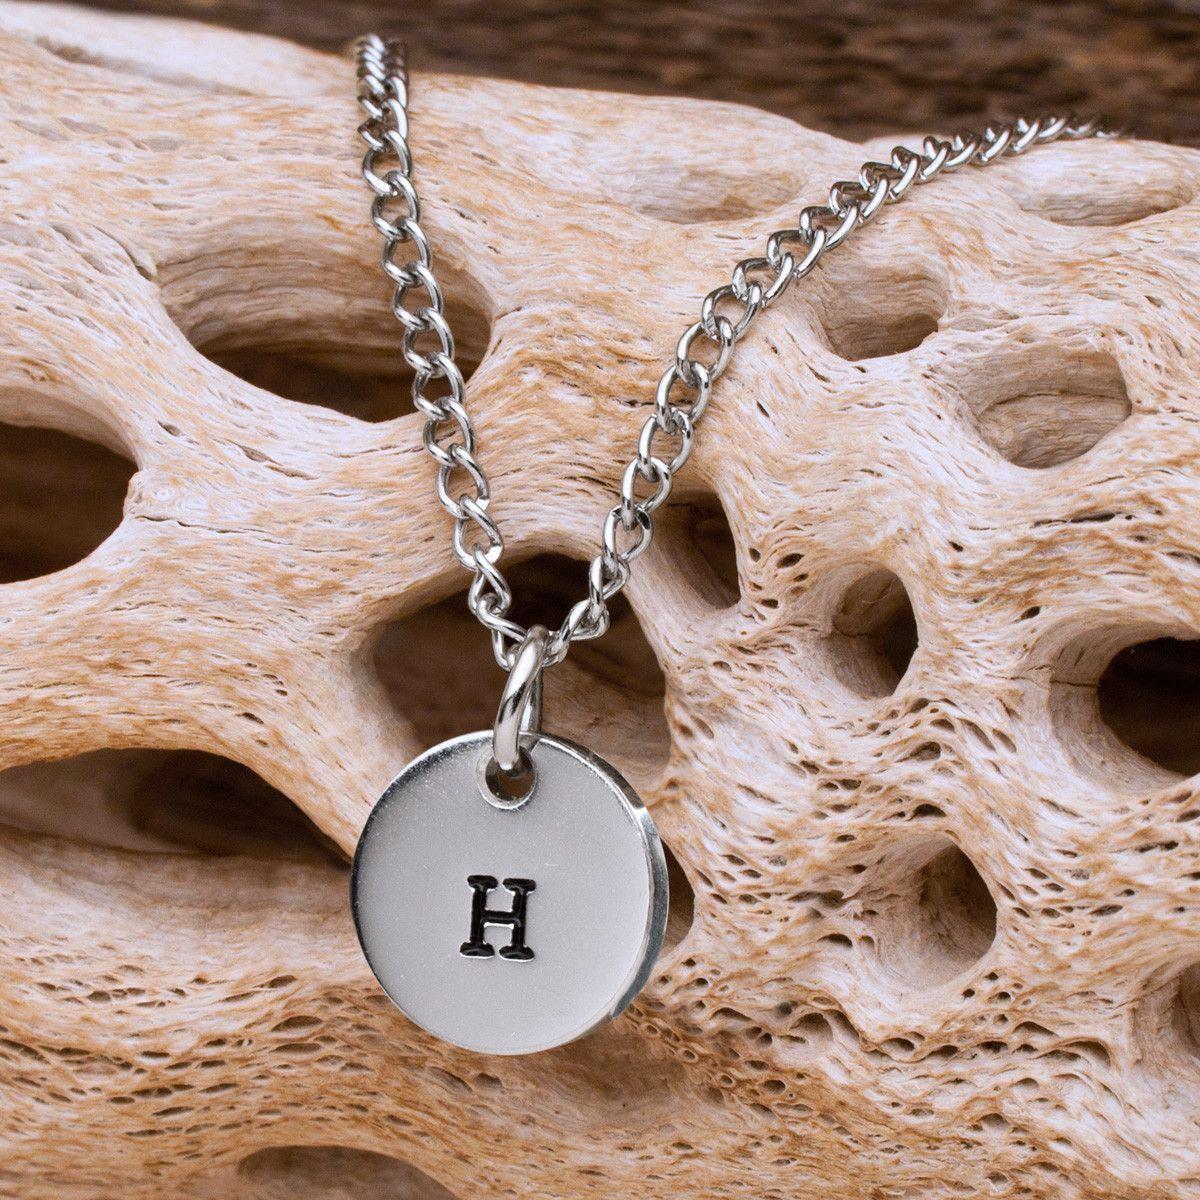 Personalized Charm Necklace with additional charm